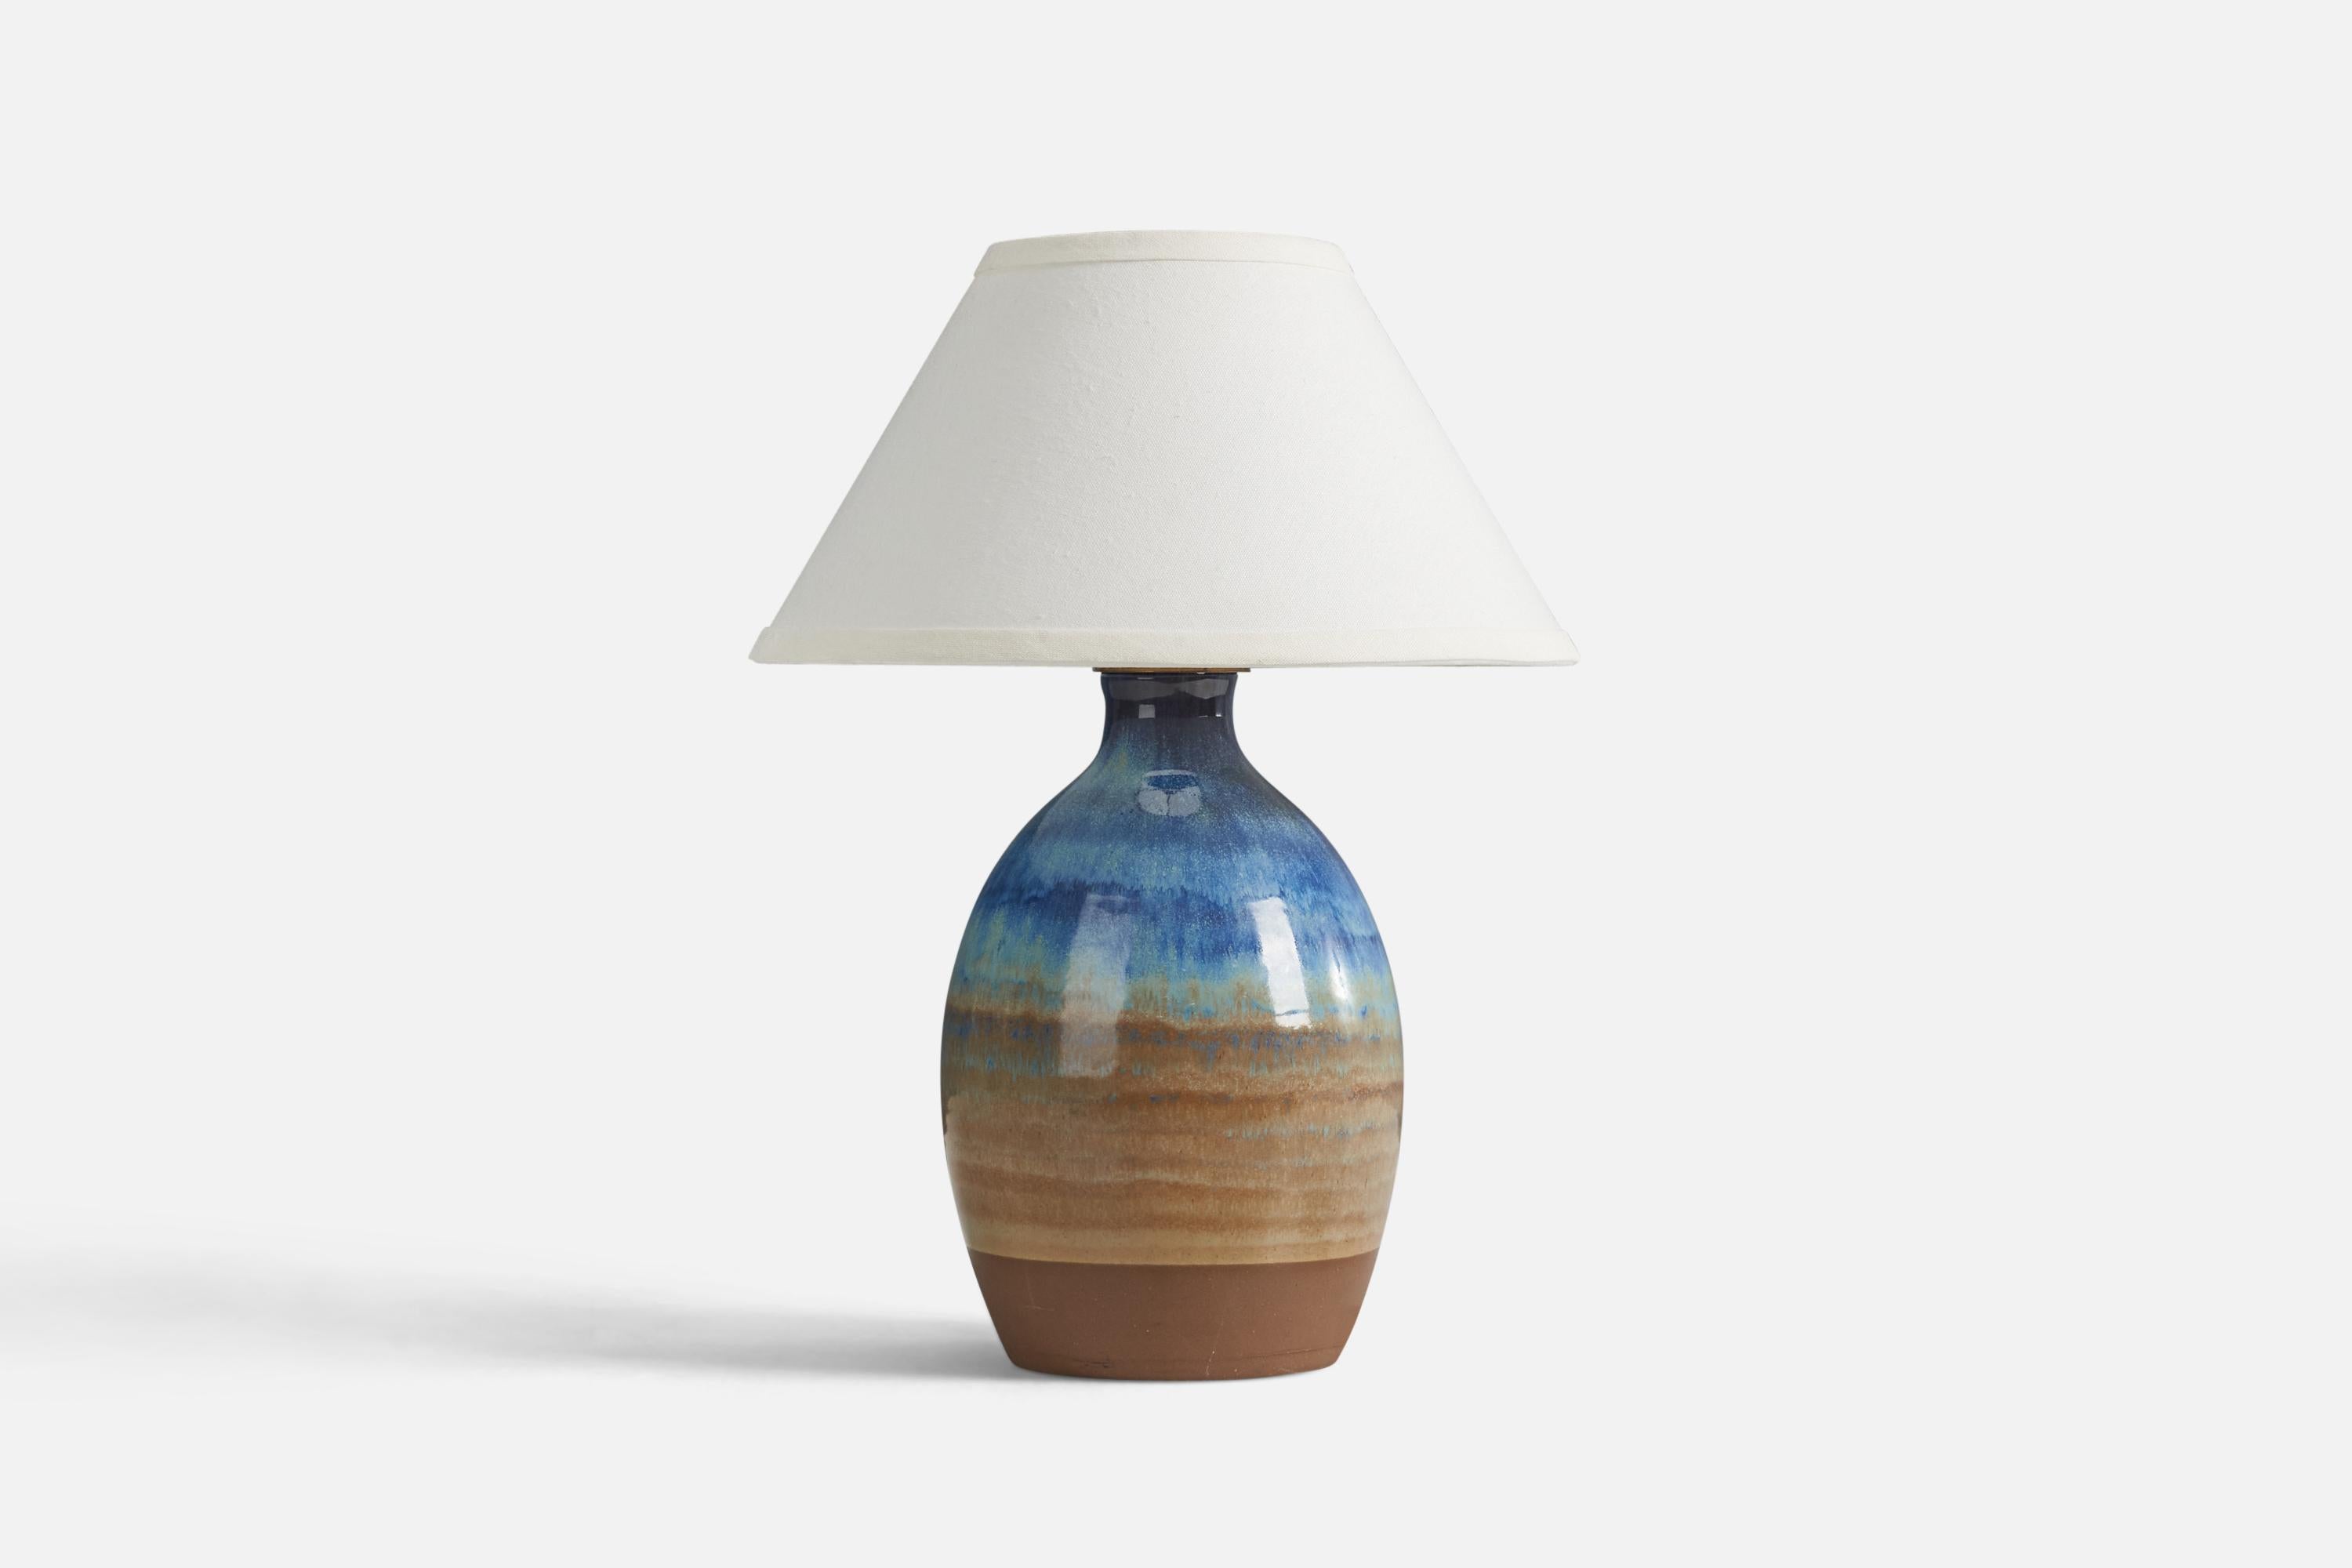 A stoneware table lamp designed and produced by Michael Andersen, Denmark, 1960s.

Dimensions of Lamp (inches) : 12.75 x 6.93 x 6.93 (Height x Width x Depth)
Dimensions of Lampshade (inches) : 5 x 12 x 7 (Top Diameter x Bottom Diameter x